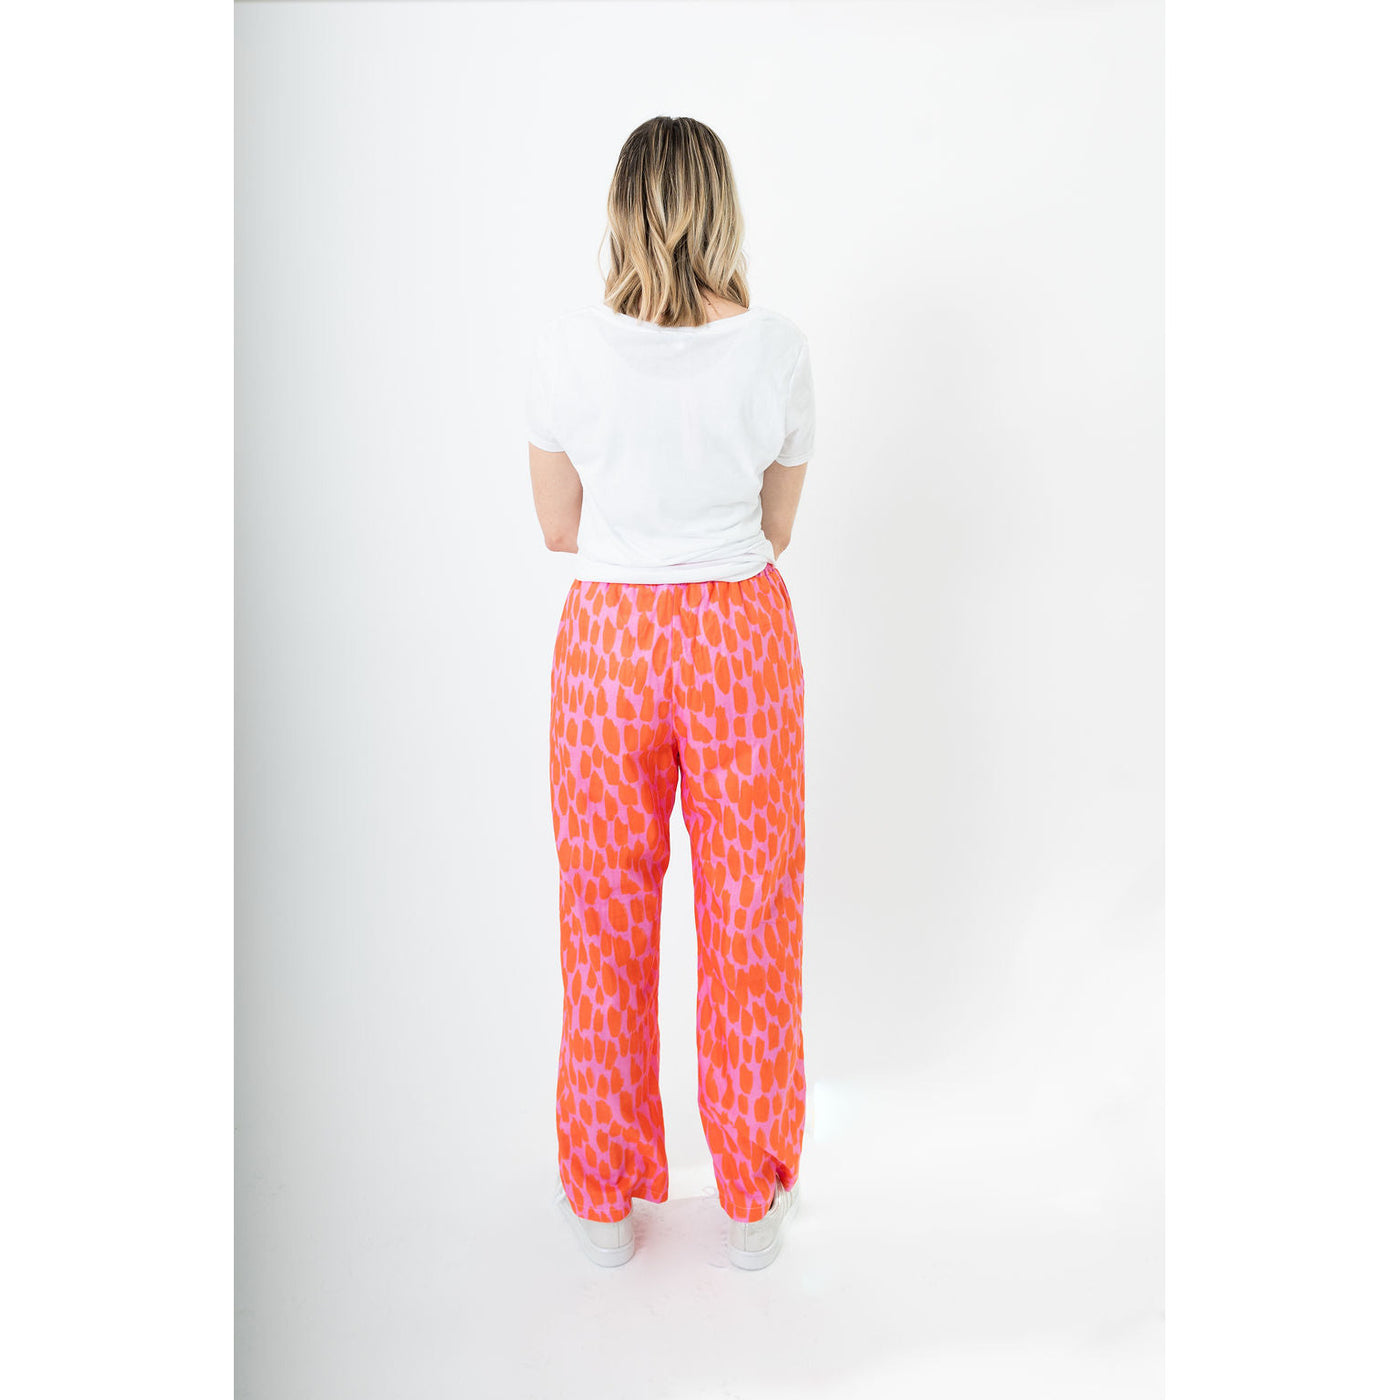 Vibrant Brush Stroke Print Cotton Lounge Pants - Stylish, Comfortable, and Perfect for Poolside and Everyday Wear